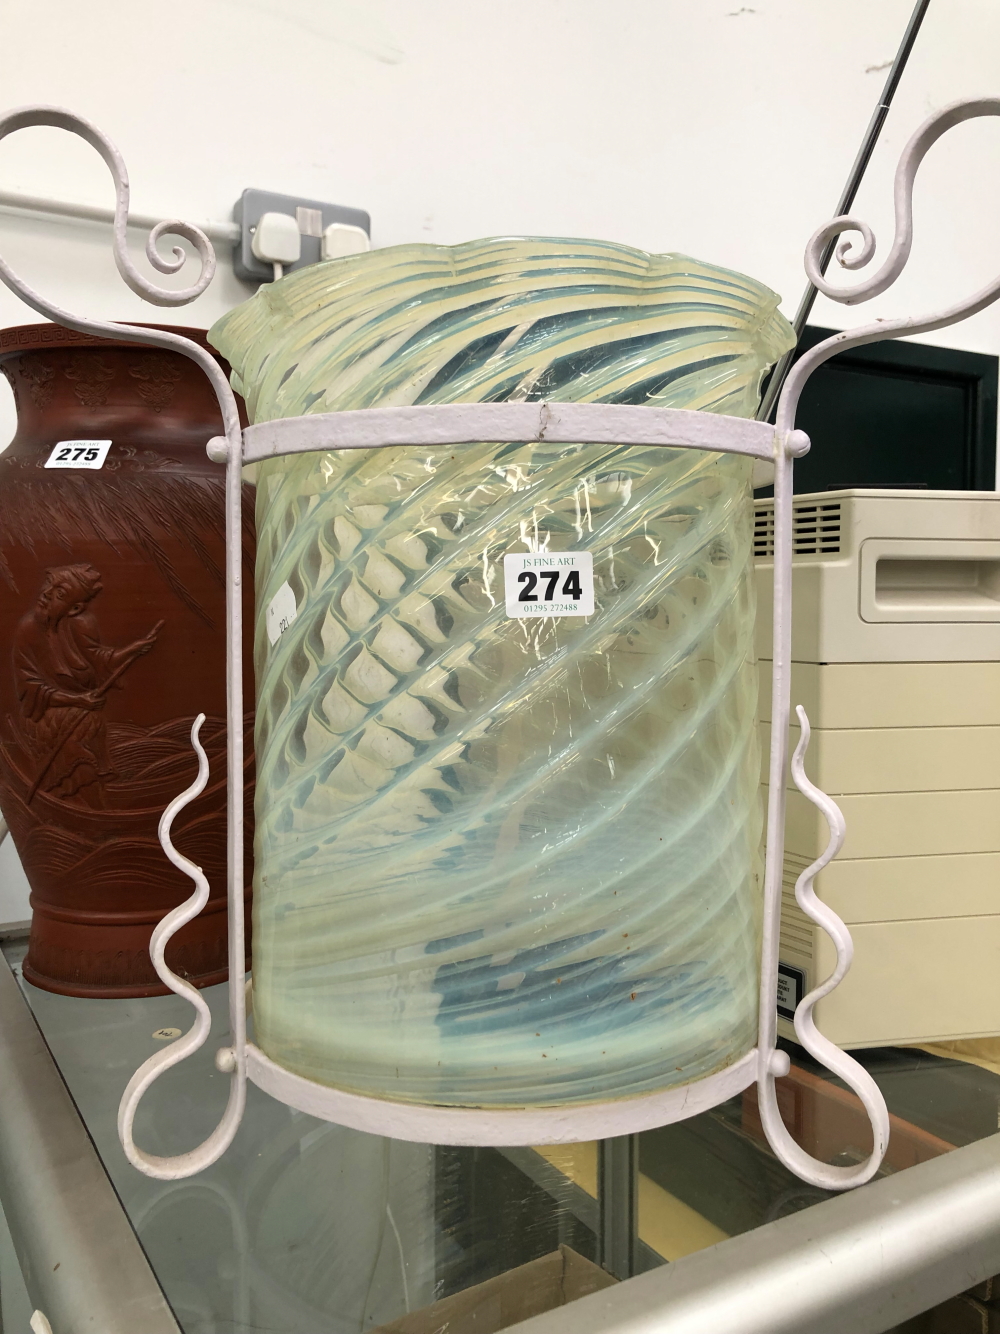 A SPIRAL RIBBED VASELINE GLASS LANTERN IN ARTS AND CRAFTS PAINTED METAL CRADLE - Image 2 of 2